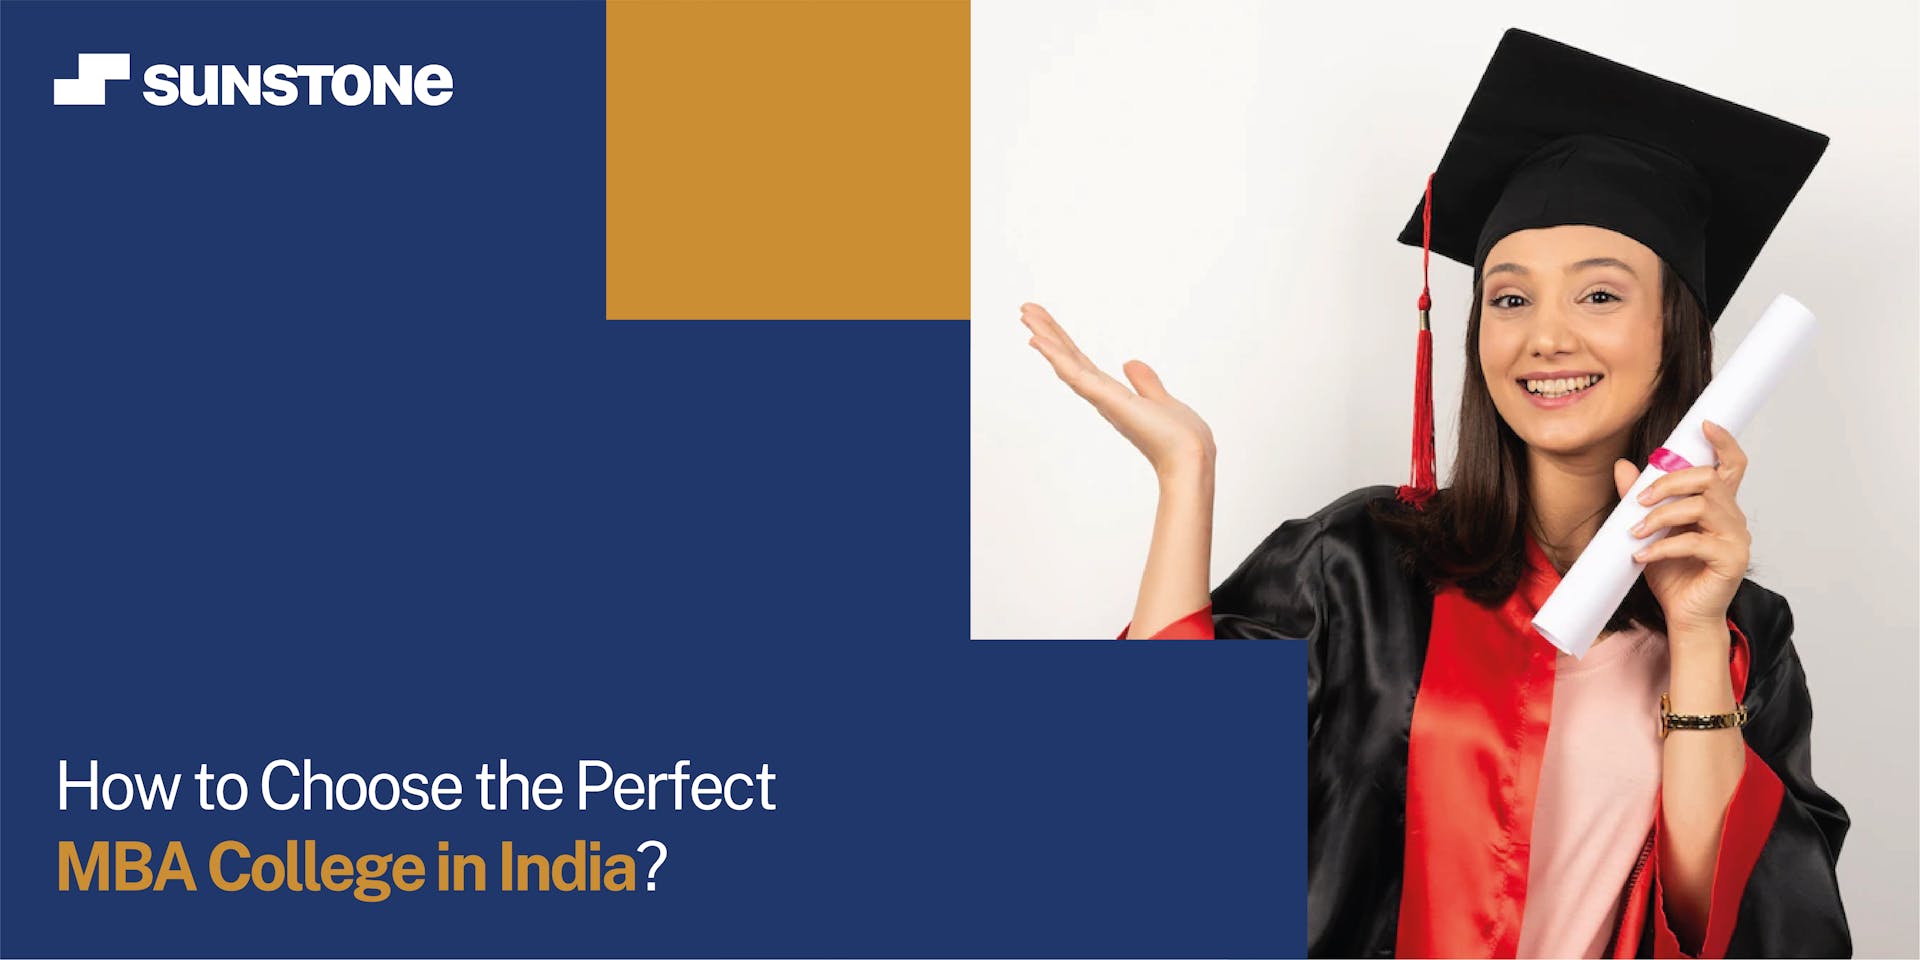 How to Choose the Perfect MBA College in India?